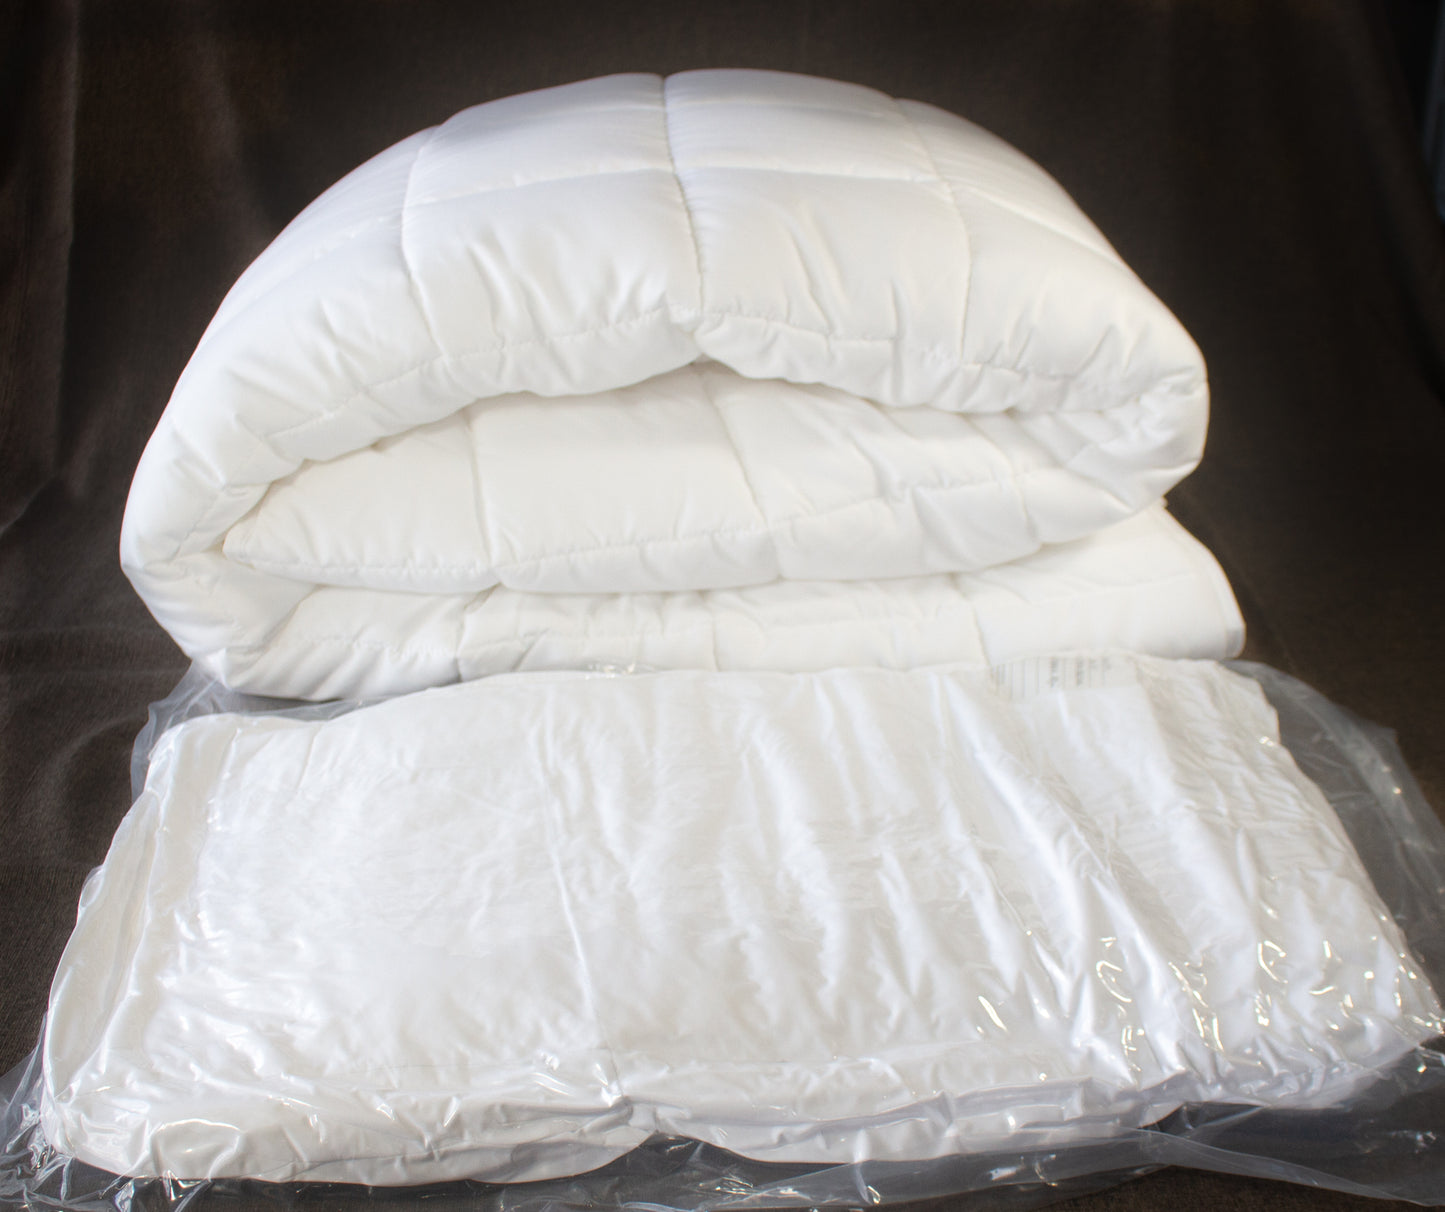 Peach Touch™ Comforter